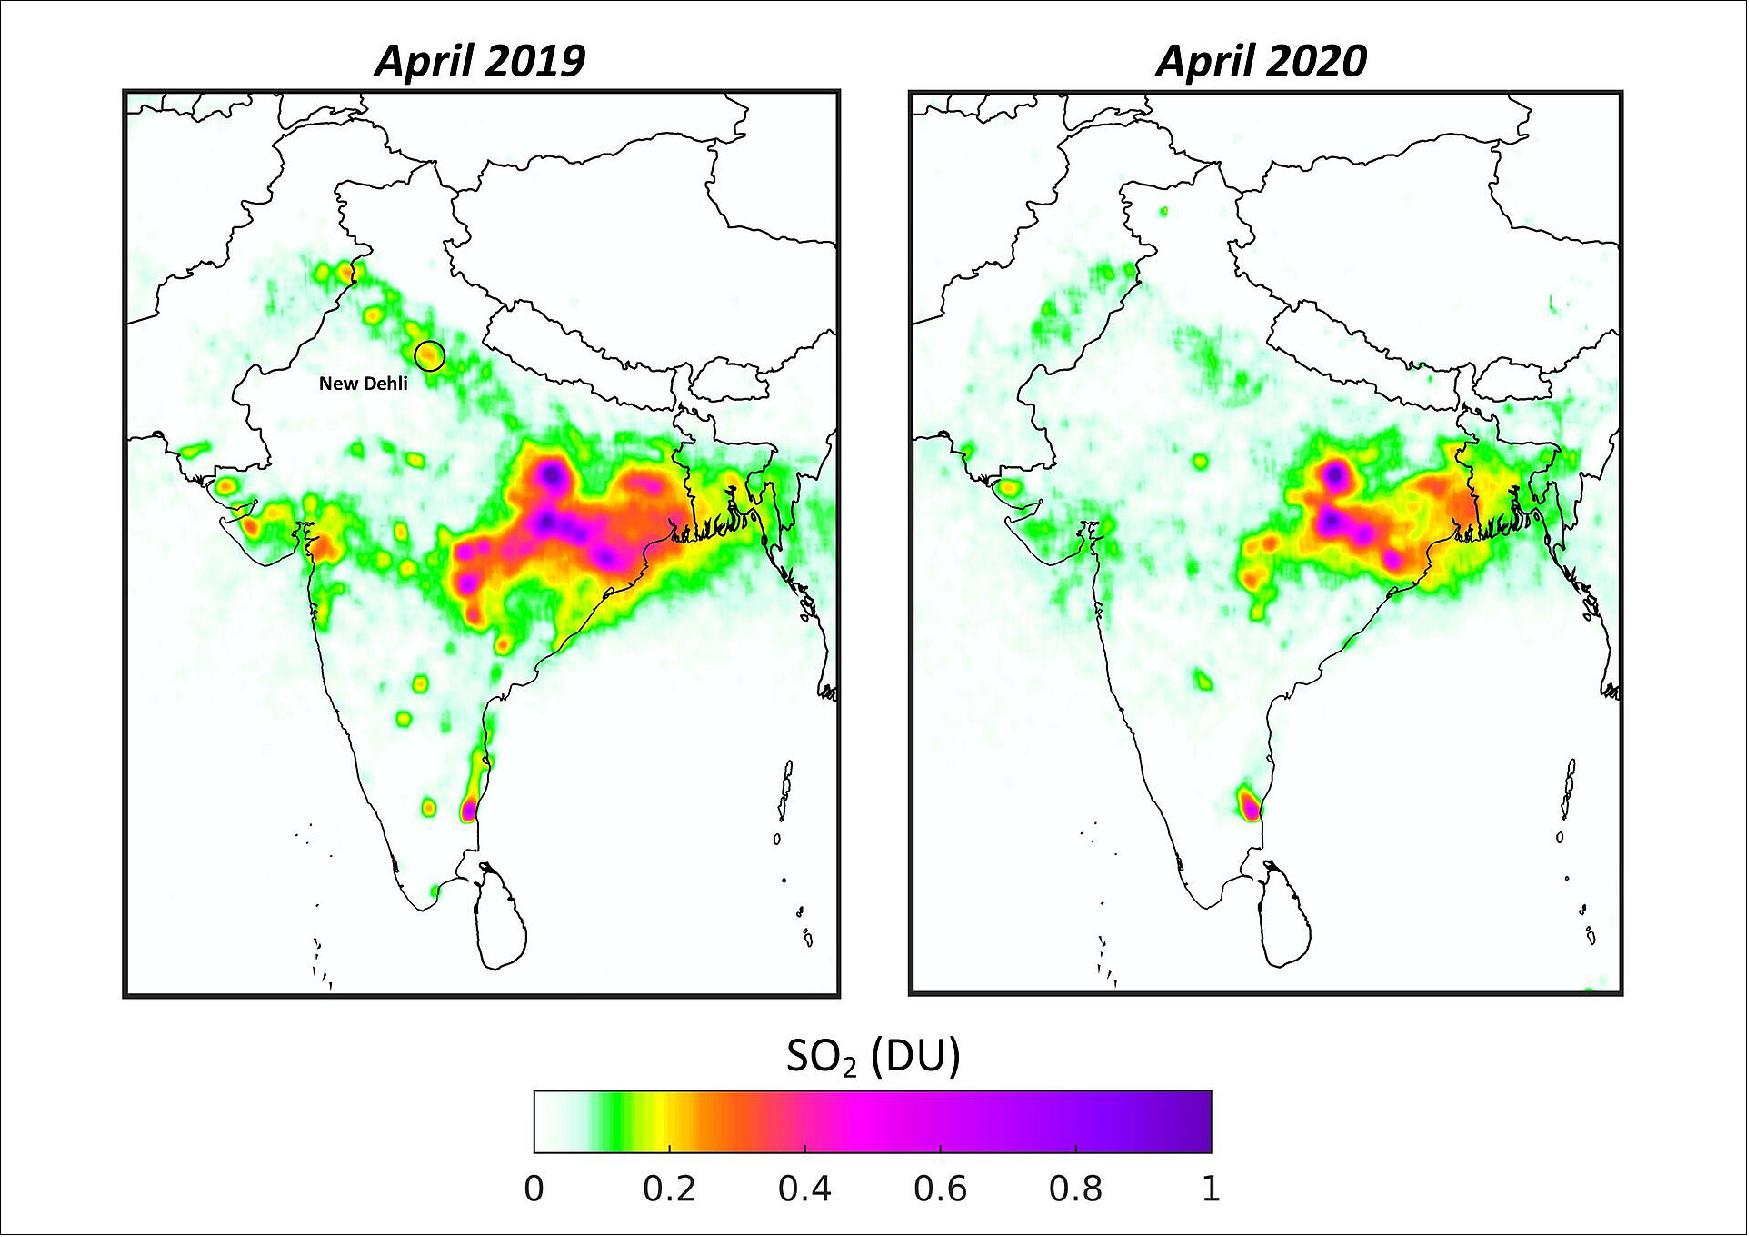 Figure 61: Based on measurements gathered by the Copernicus Sentinel-5P satellite, the map shows the averaged concentrations of sulphur dioxide over India from April 2019, compared to April 2020. The darker shades of red and purple depict greater concentrations of sulphur dioxide in the atmosphere. Sulphur dioxide mainly comes from industrial processes and causes many health-related problems (image credit: ESA, the image contains modified Copernicus data (2019-20), processed by BIRA-IASB)